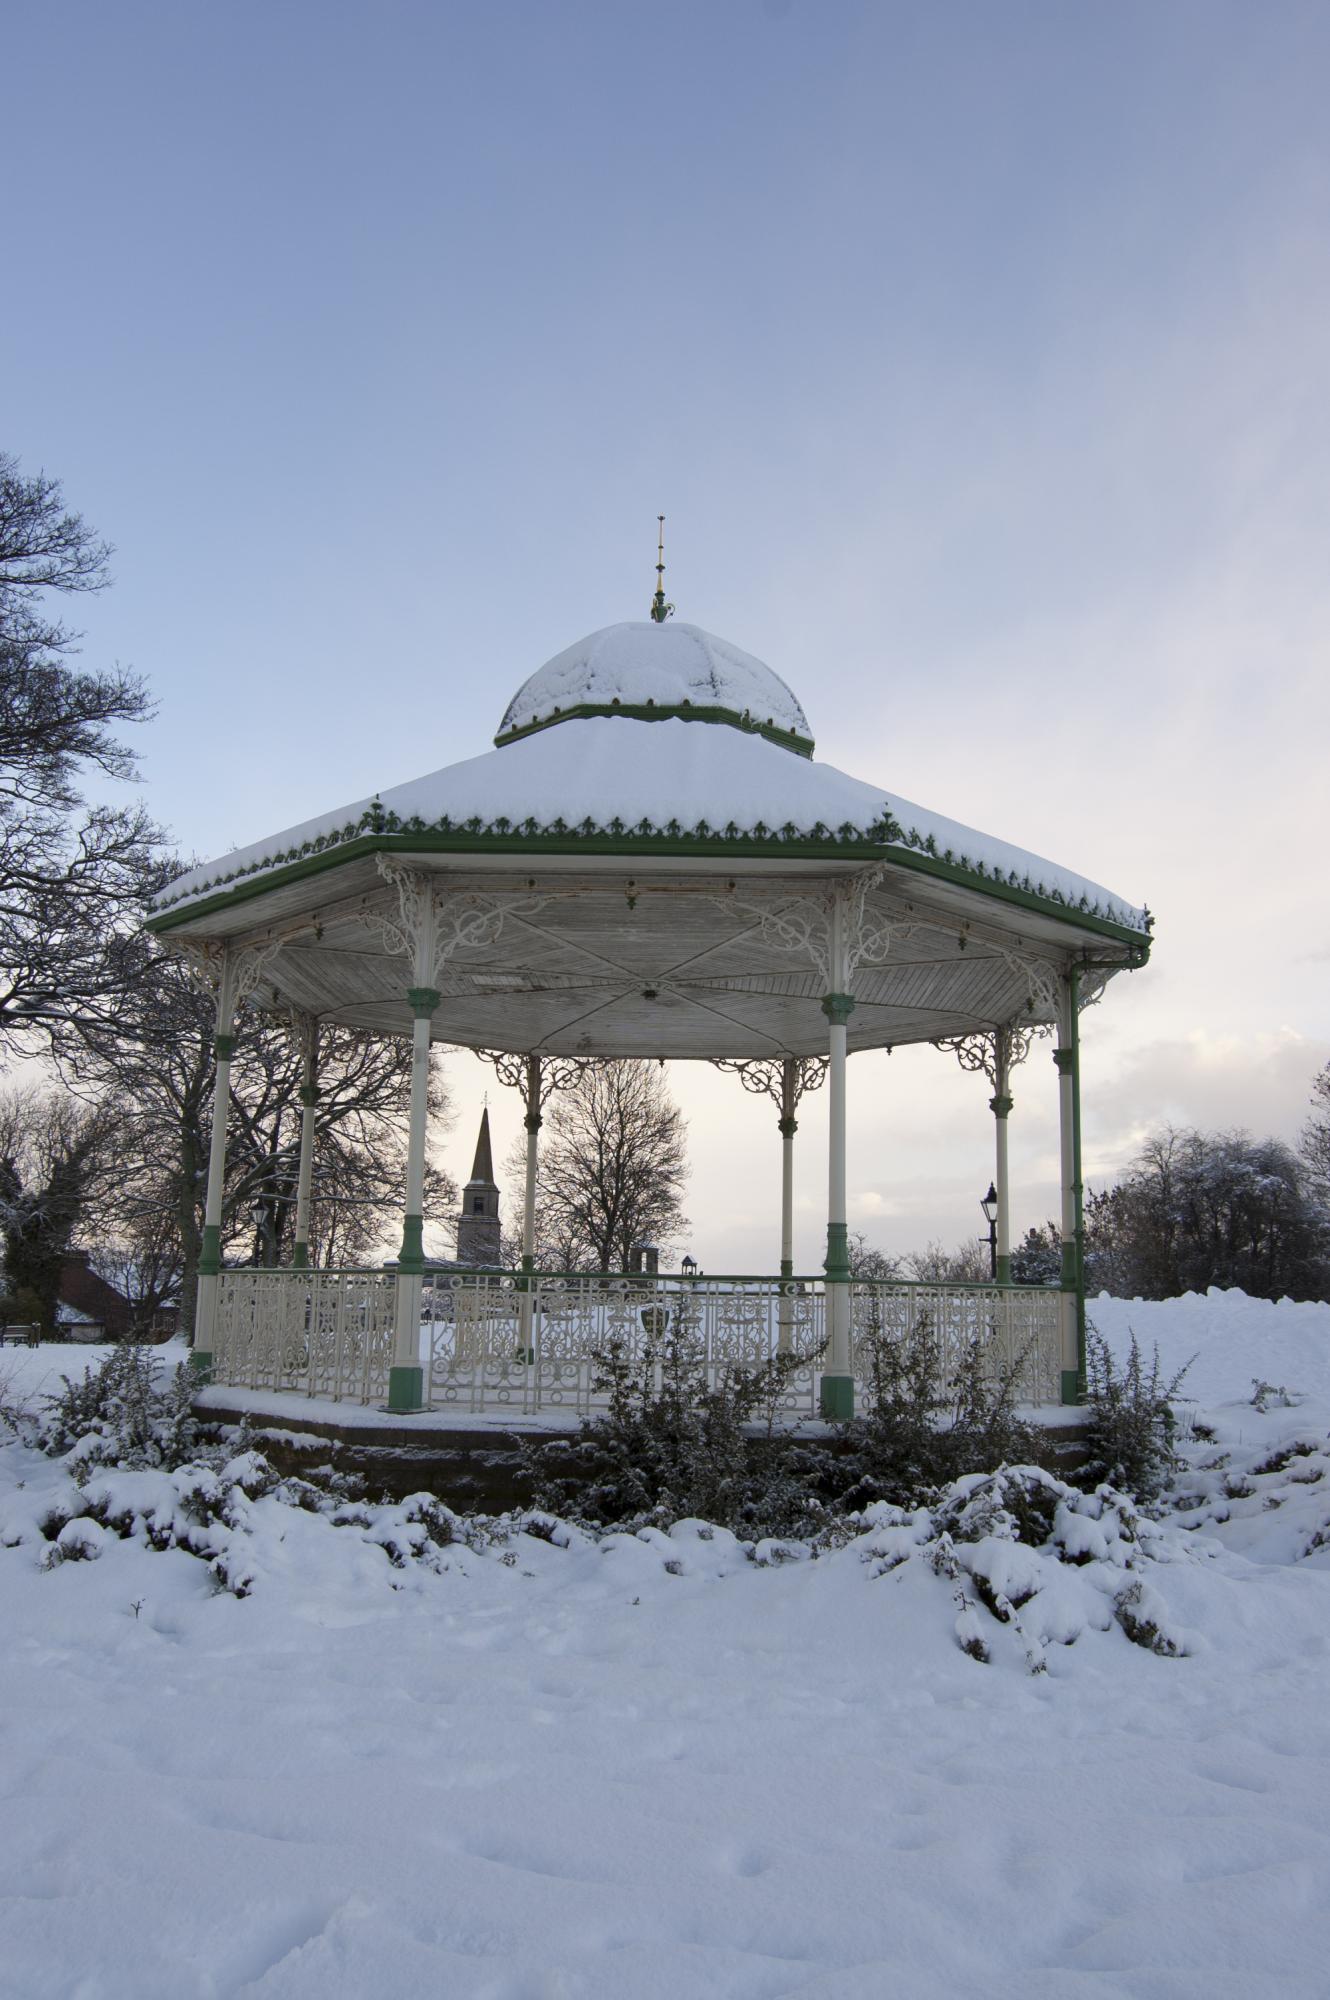 Peel park band stand in the snow